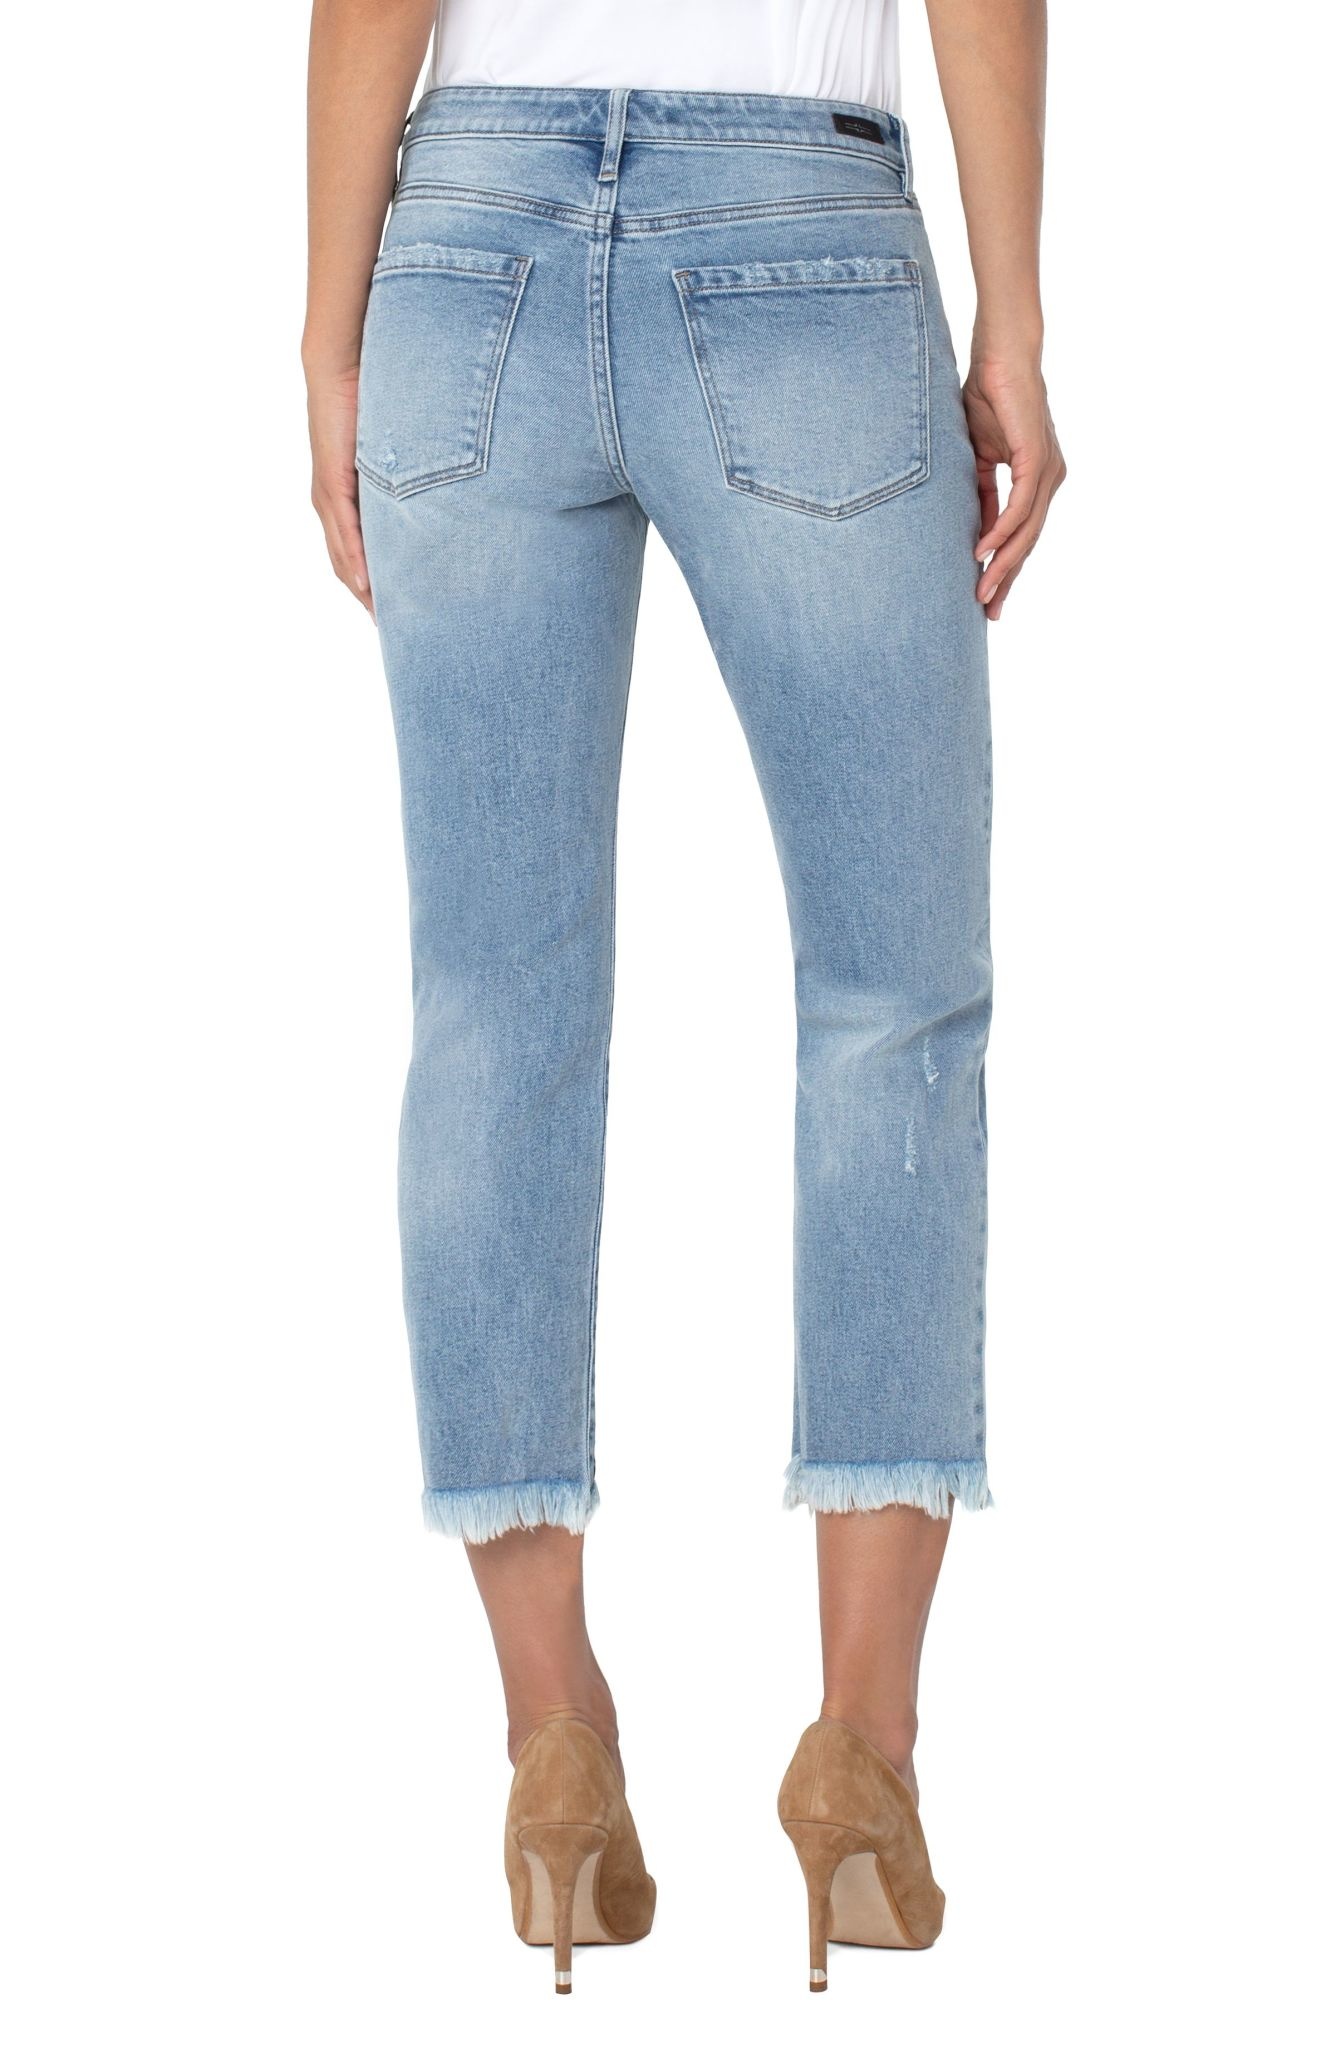 Liverpool Jeans Kennedy Crop Straight With Fray Hem Women's